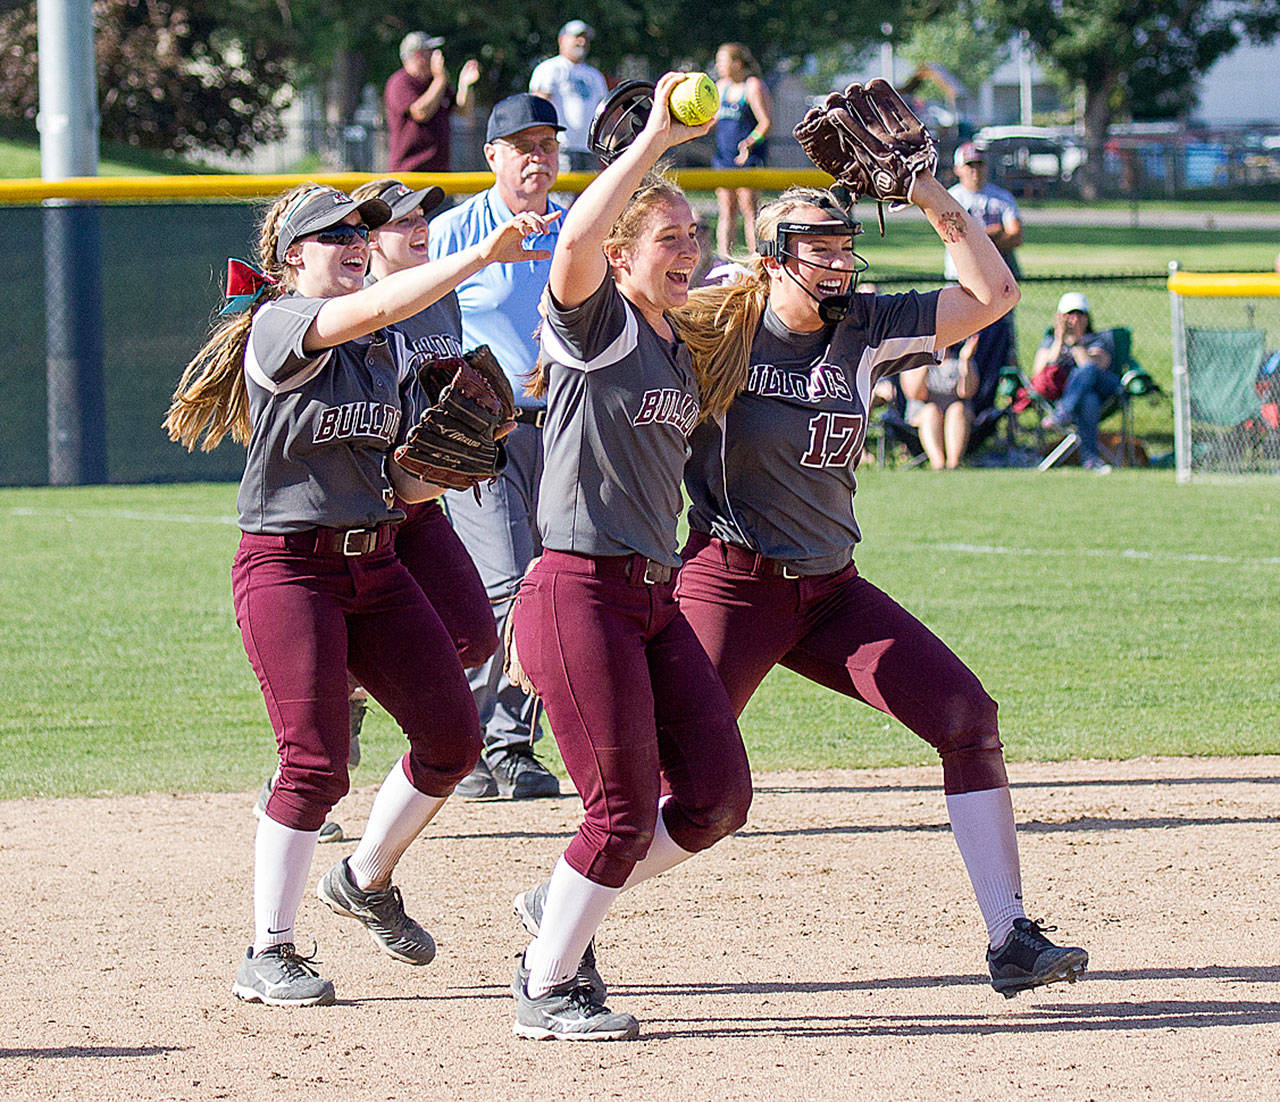 Two Trophies, no titles for Elma, Montesano at 1A State Championships